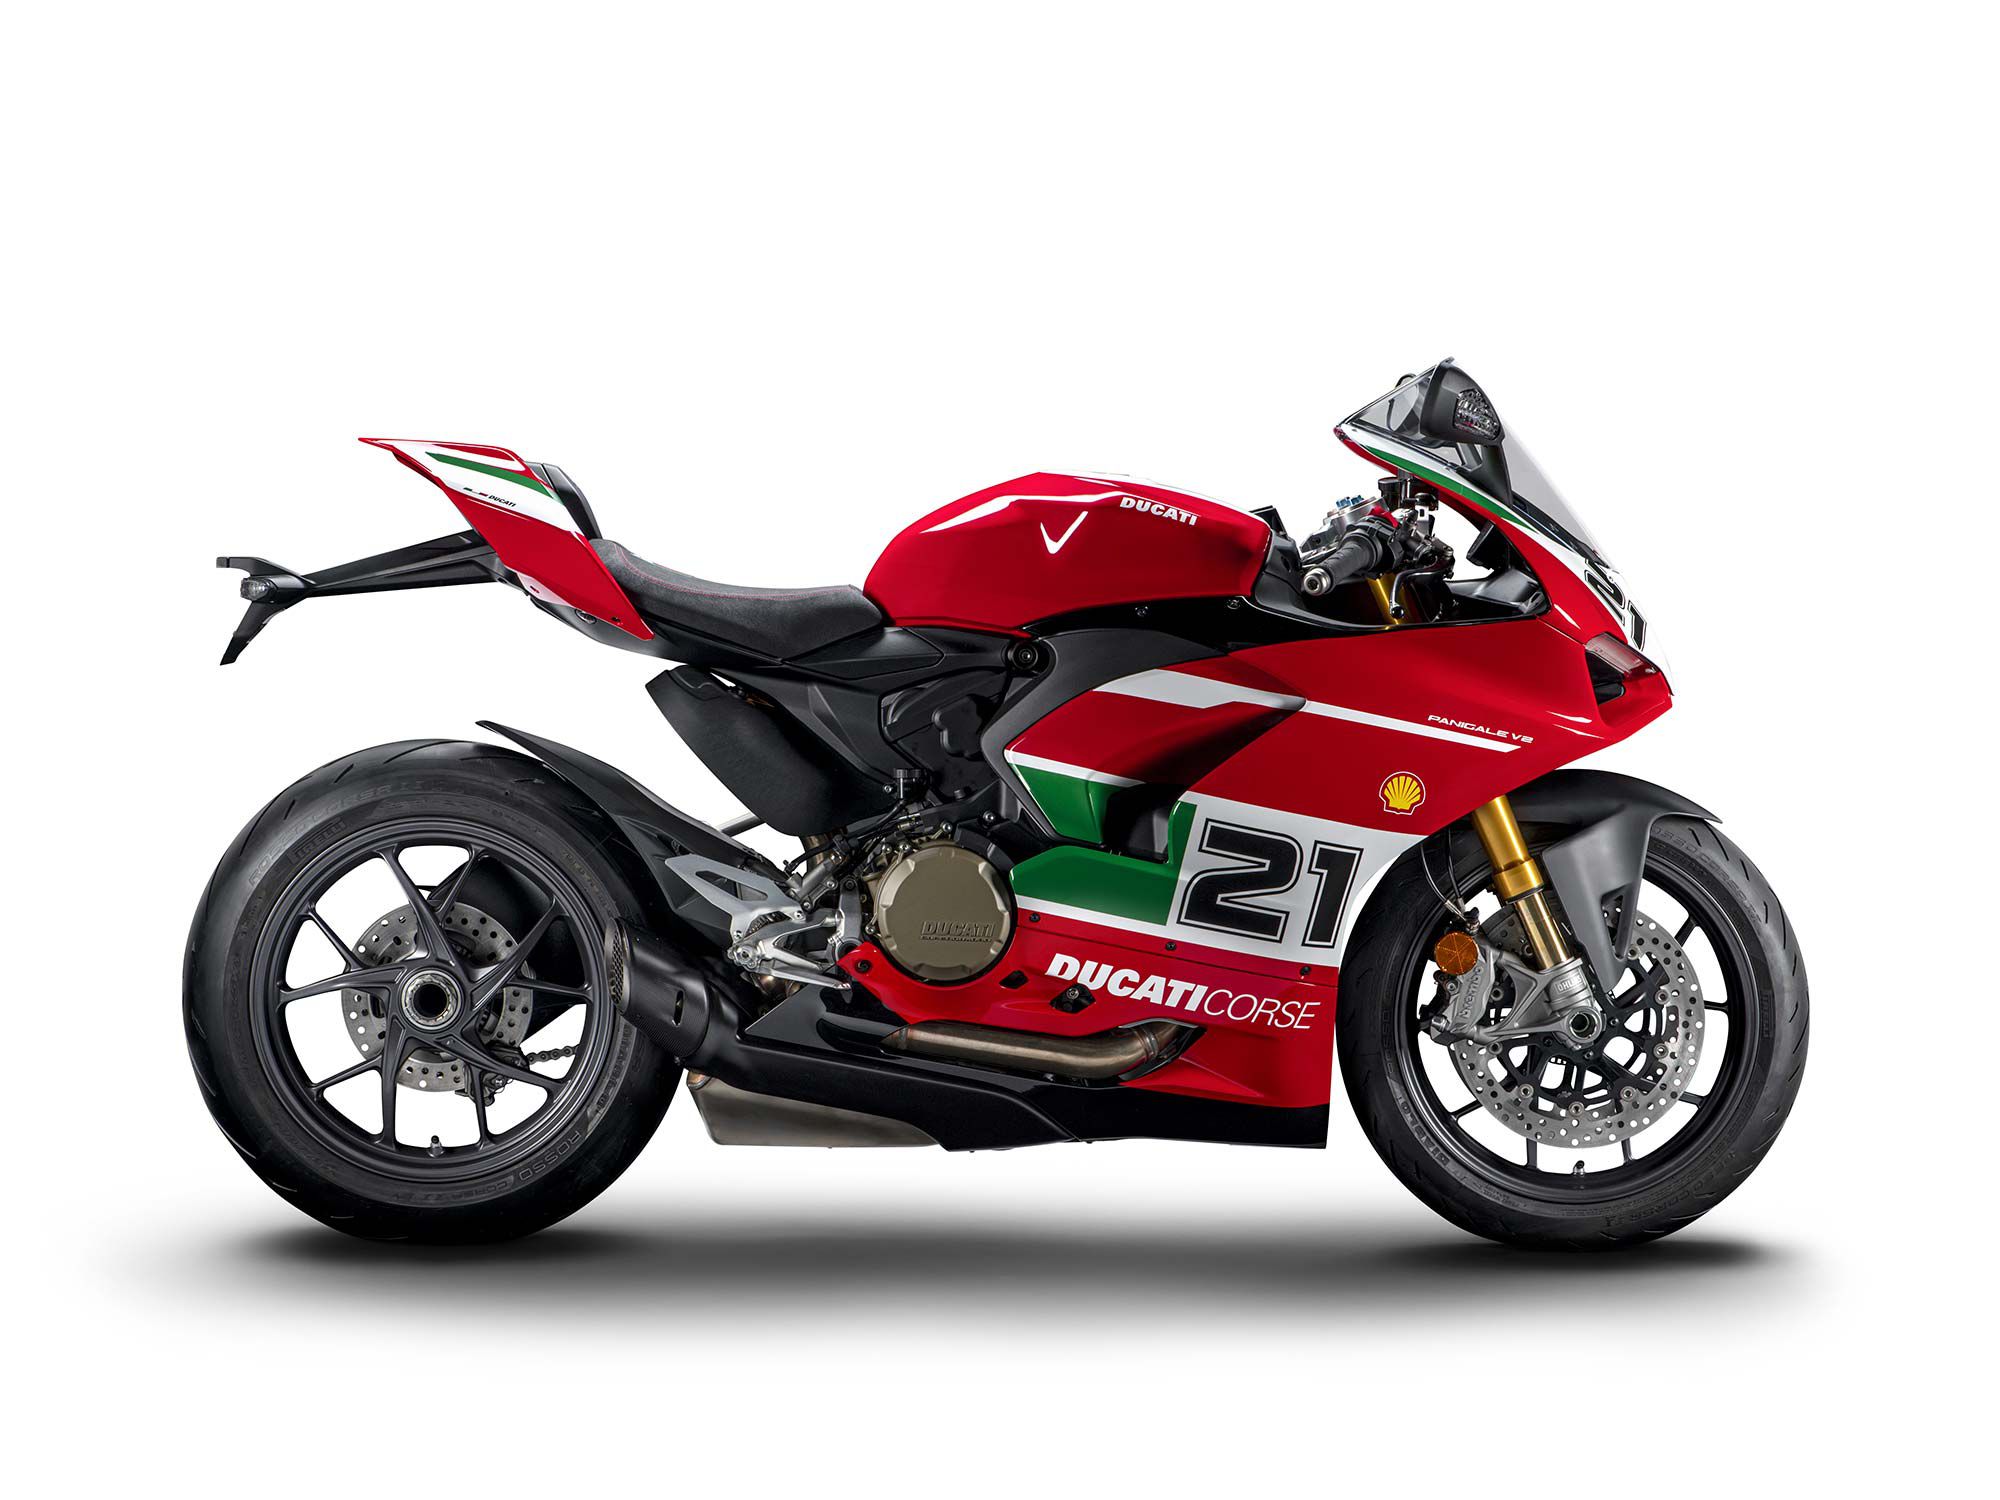 In addition to the one-off tribute graphics, the Panigale V2 Bayliss 1st Championship 20th Anniversary Edition also comes with premium Öhlins suspension, a custom triple clamp, and special exhaust.